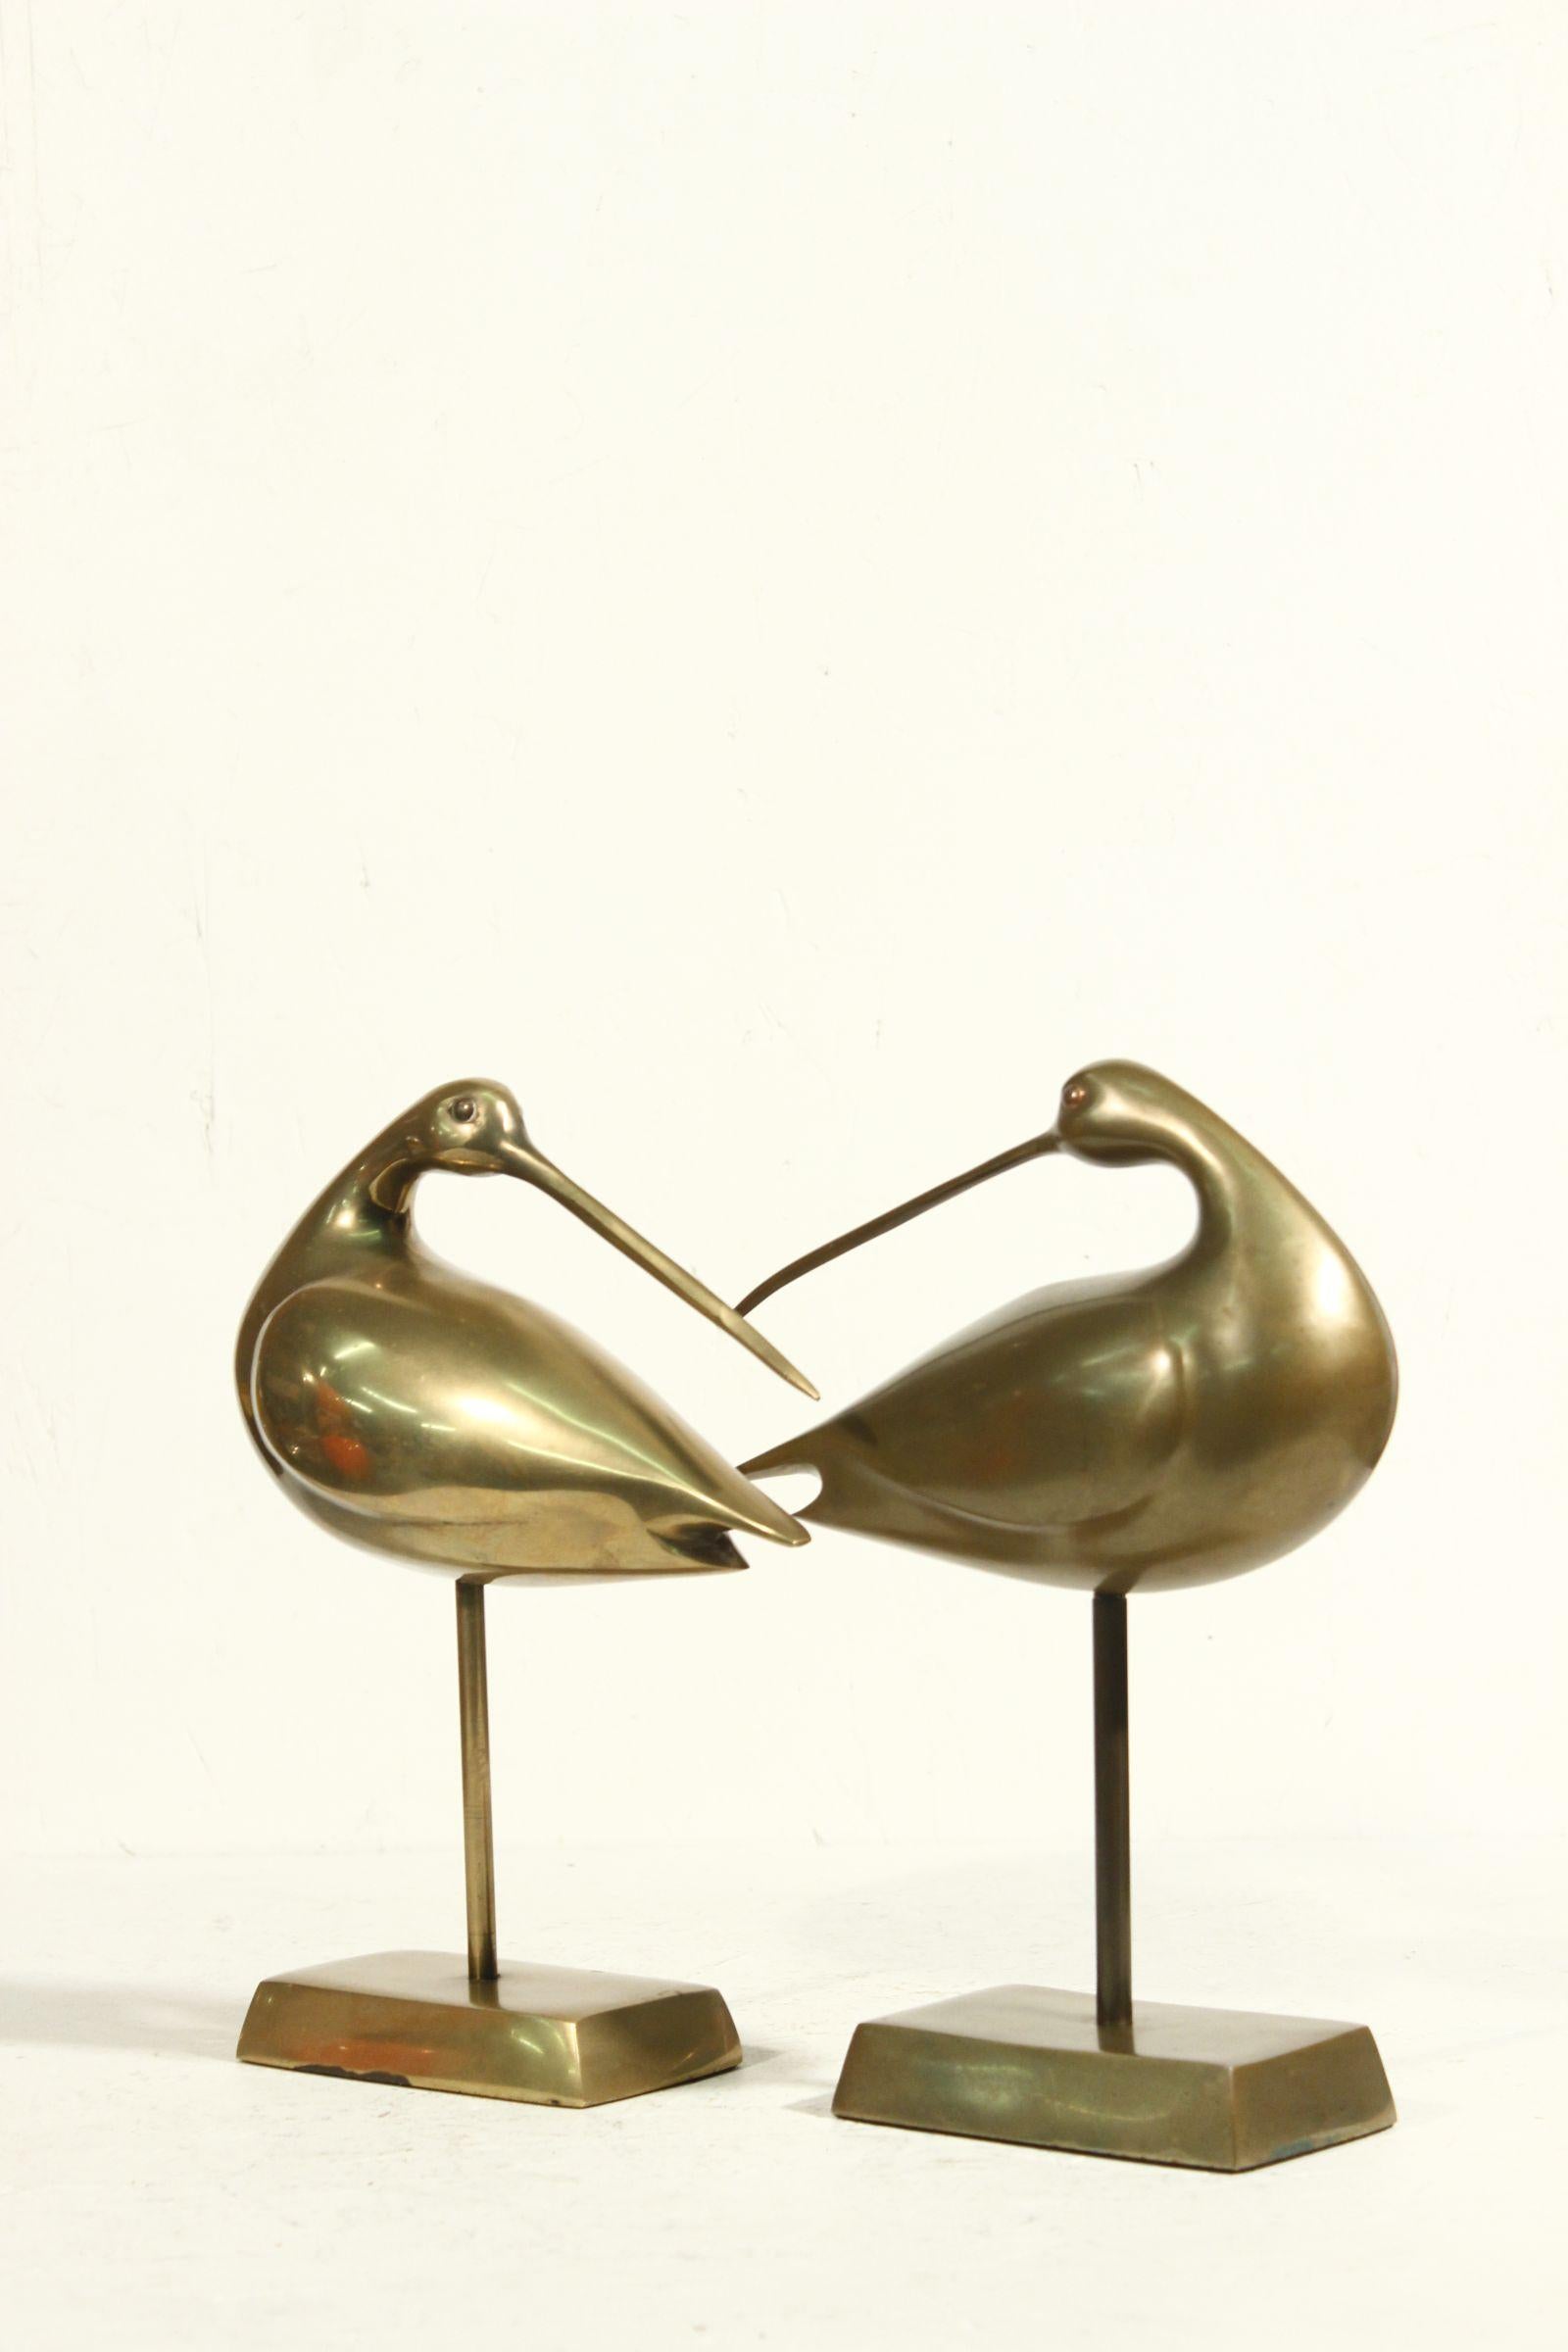 Pair of brass bird sculptures representing storks or cranes. 

In great overall condition, showing a nice patina of age. 

